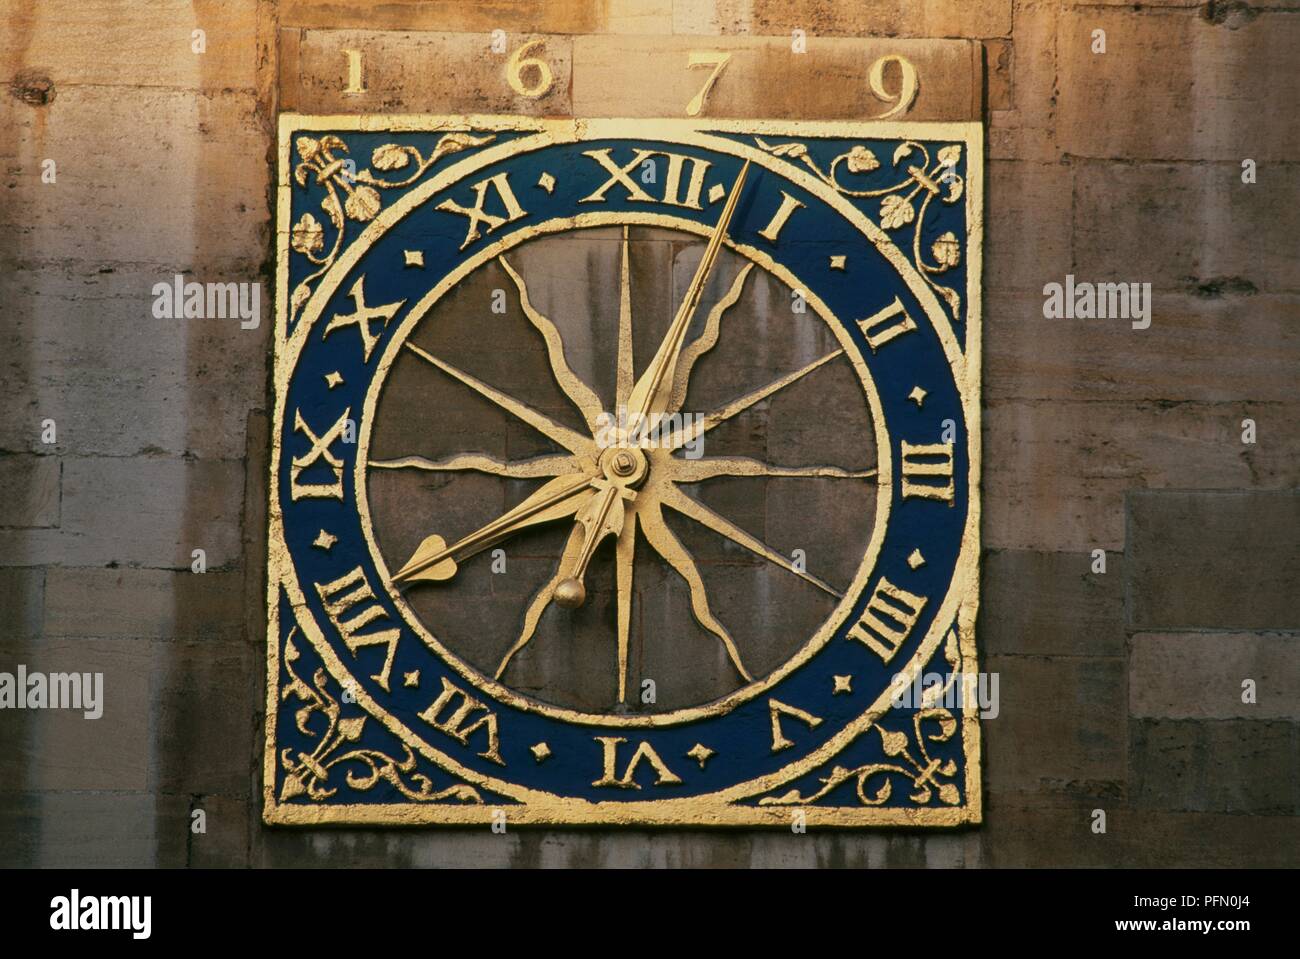 England, University of Cambridge, clock on tower of Great St Mary's Church Stock Photo